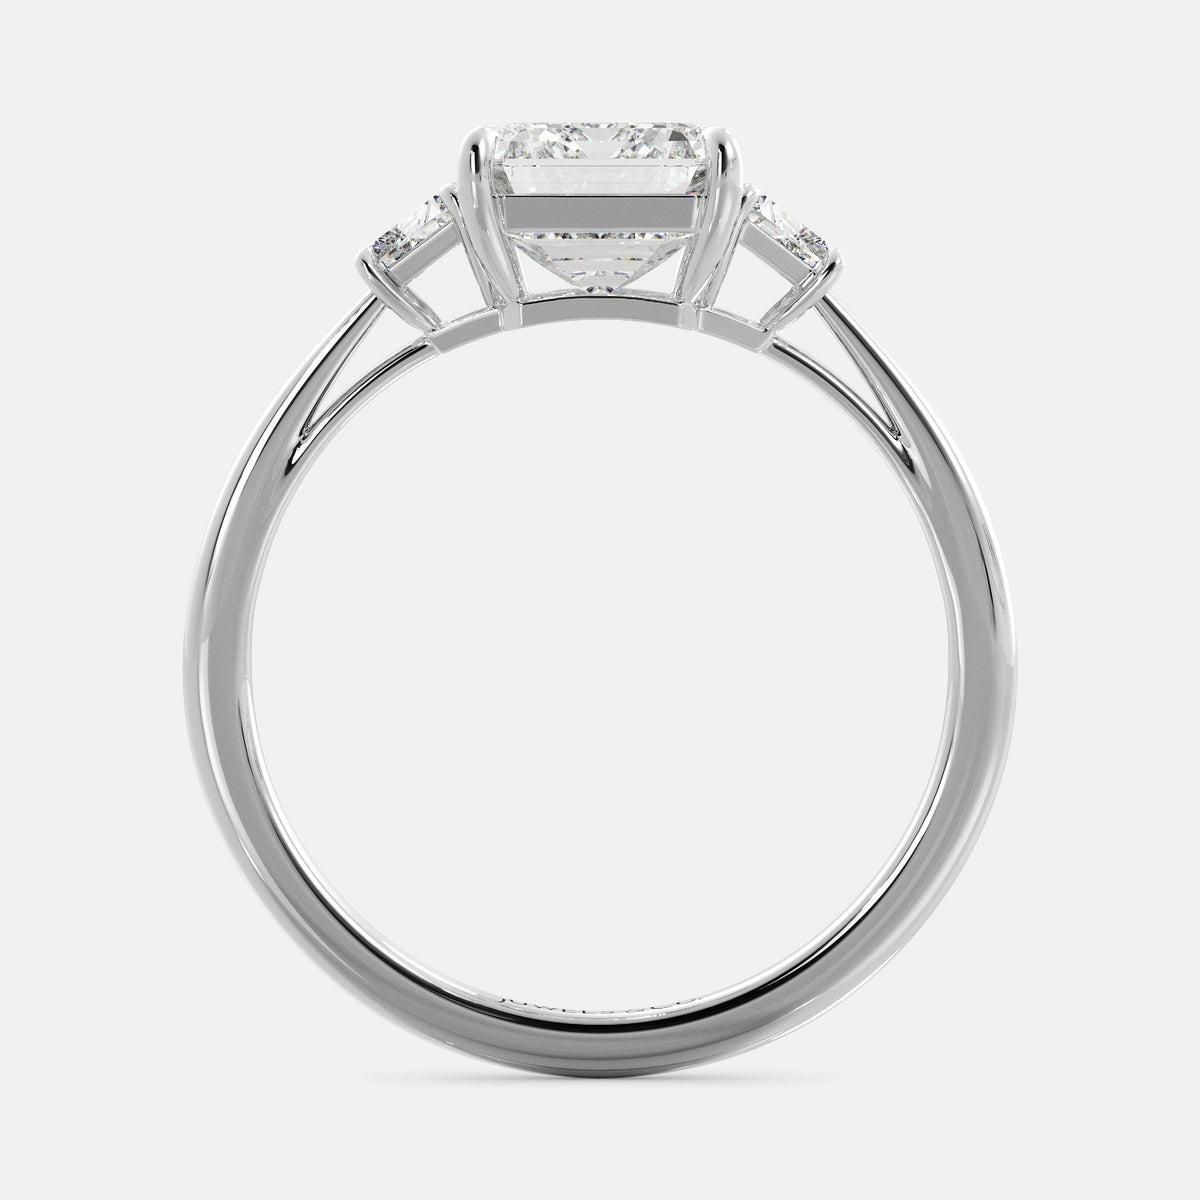 Embrace Opulence: The Julia Emerald Solitaire Diamond Ring with Tapered Baguettes